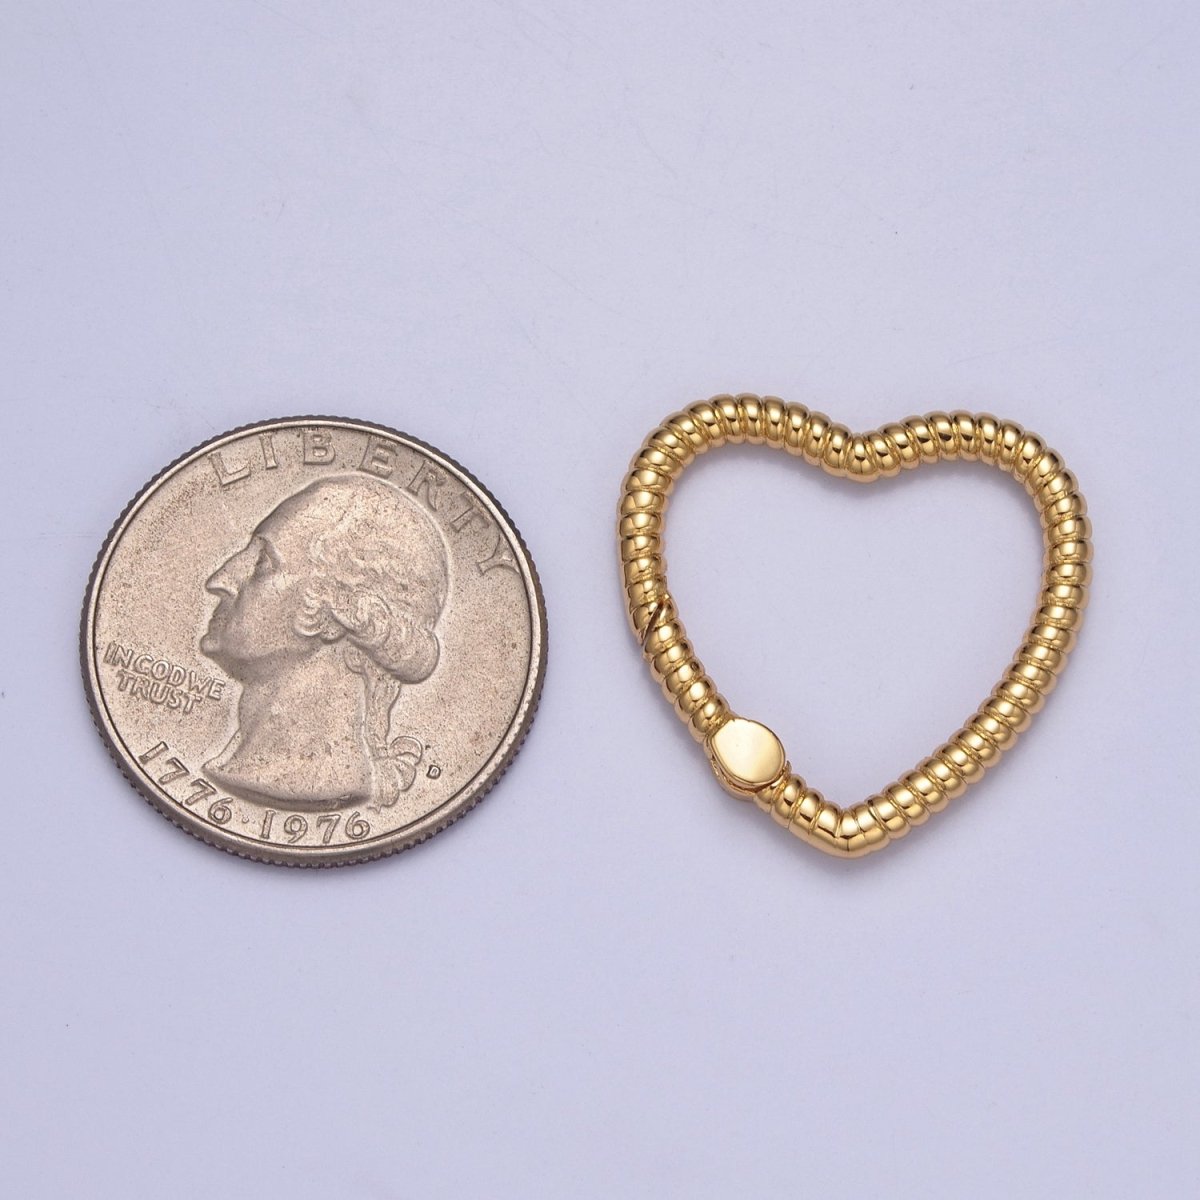 Dainty Gold Spring Heart Gate Ring, Push Gate Clasp Charm Holder 14K Gold Filled Clasp for Charm Holder Connector L-725 L-726 - DLUXCA